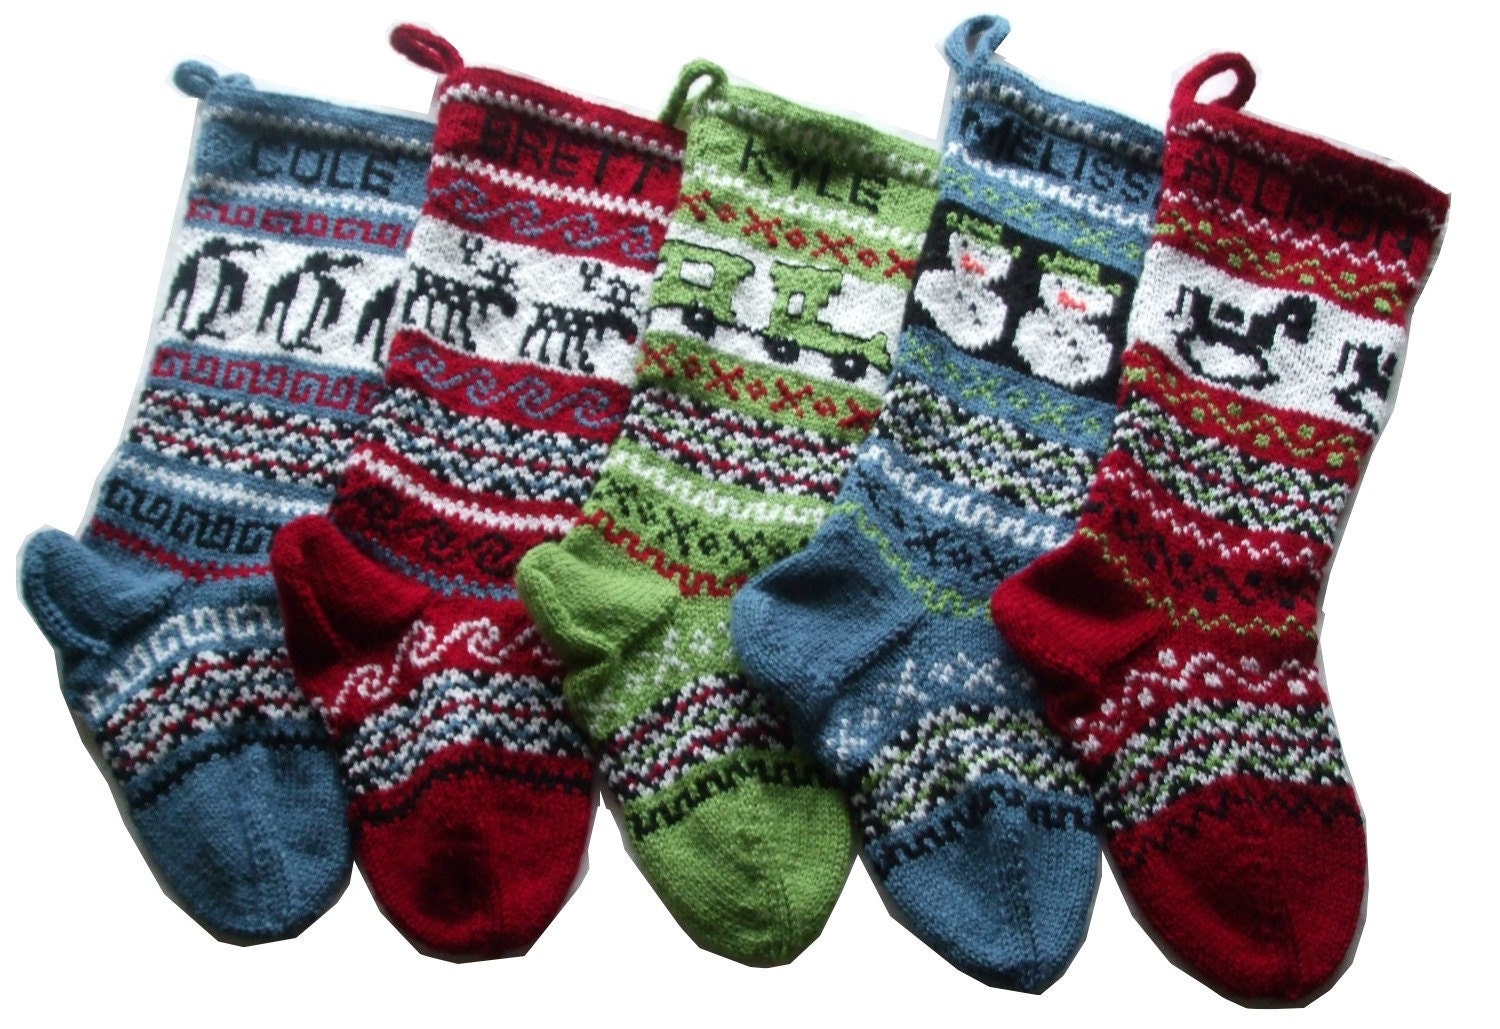 CIJ Sale 10% off Personalized knitted Christmas Stockings Set of 5